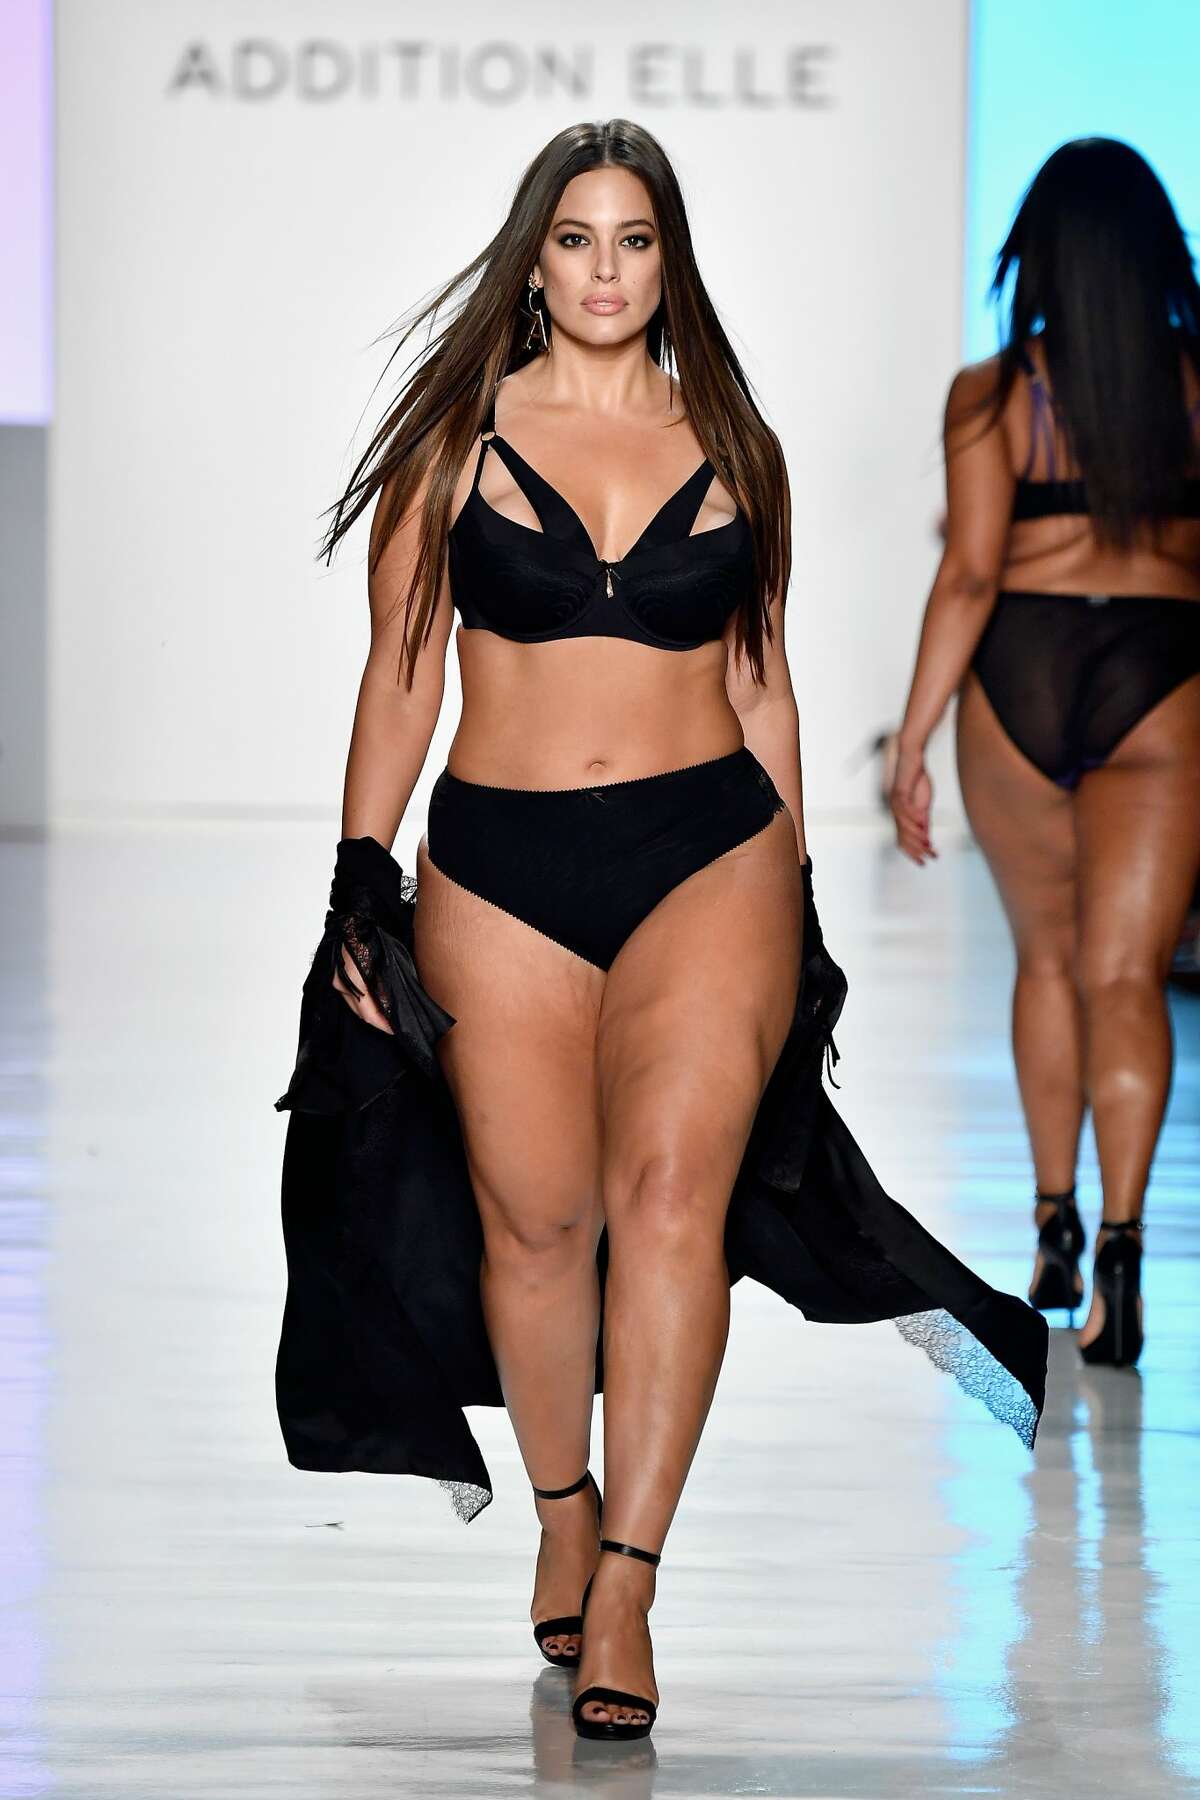 Plus-sized models you should know:Ashley Graham One of the most popular models in the industry, she admitted that she's okay with a little Photoshopping here and there.